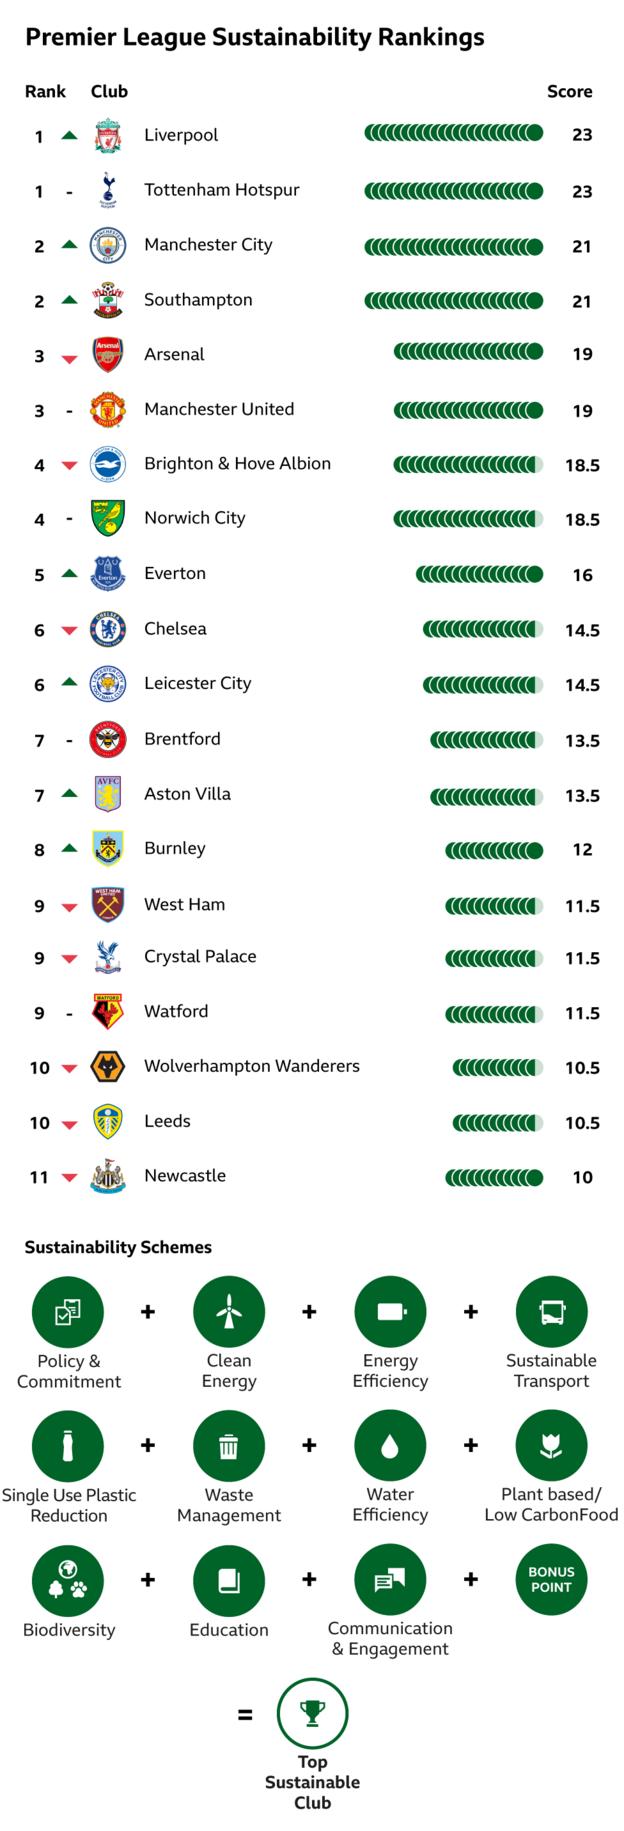 The table of Premier League club's sustainability